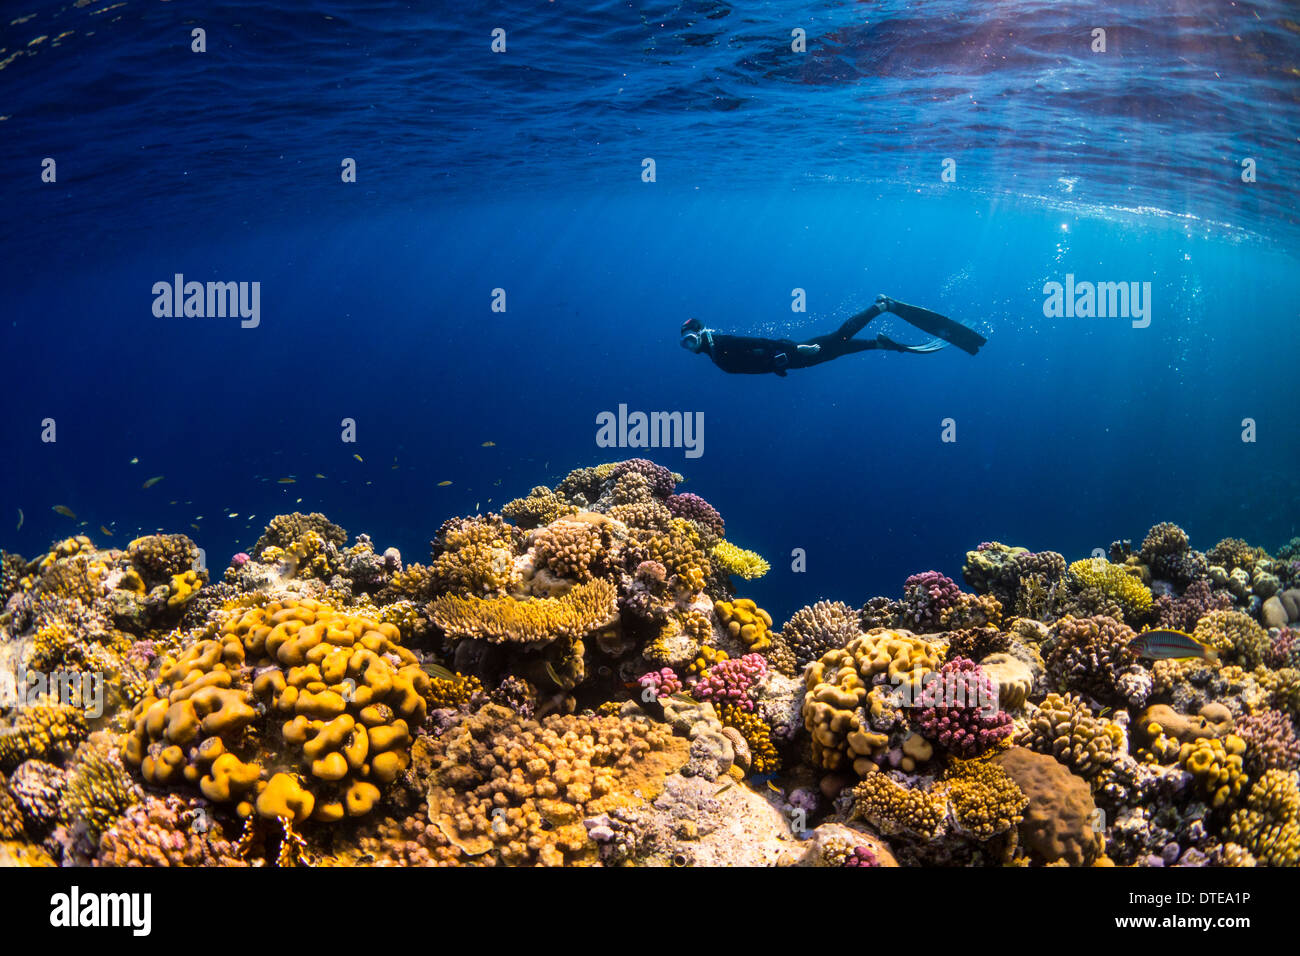 Red Sea, underwater, coral reef, sea life, marine life, ocean, scuba diving, vacation, water, diver, female diver, snorkel Stock Photo